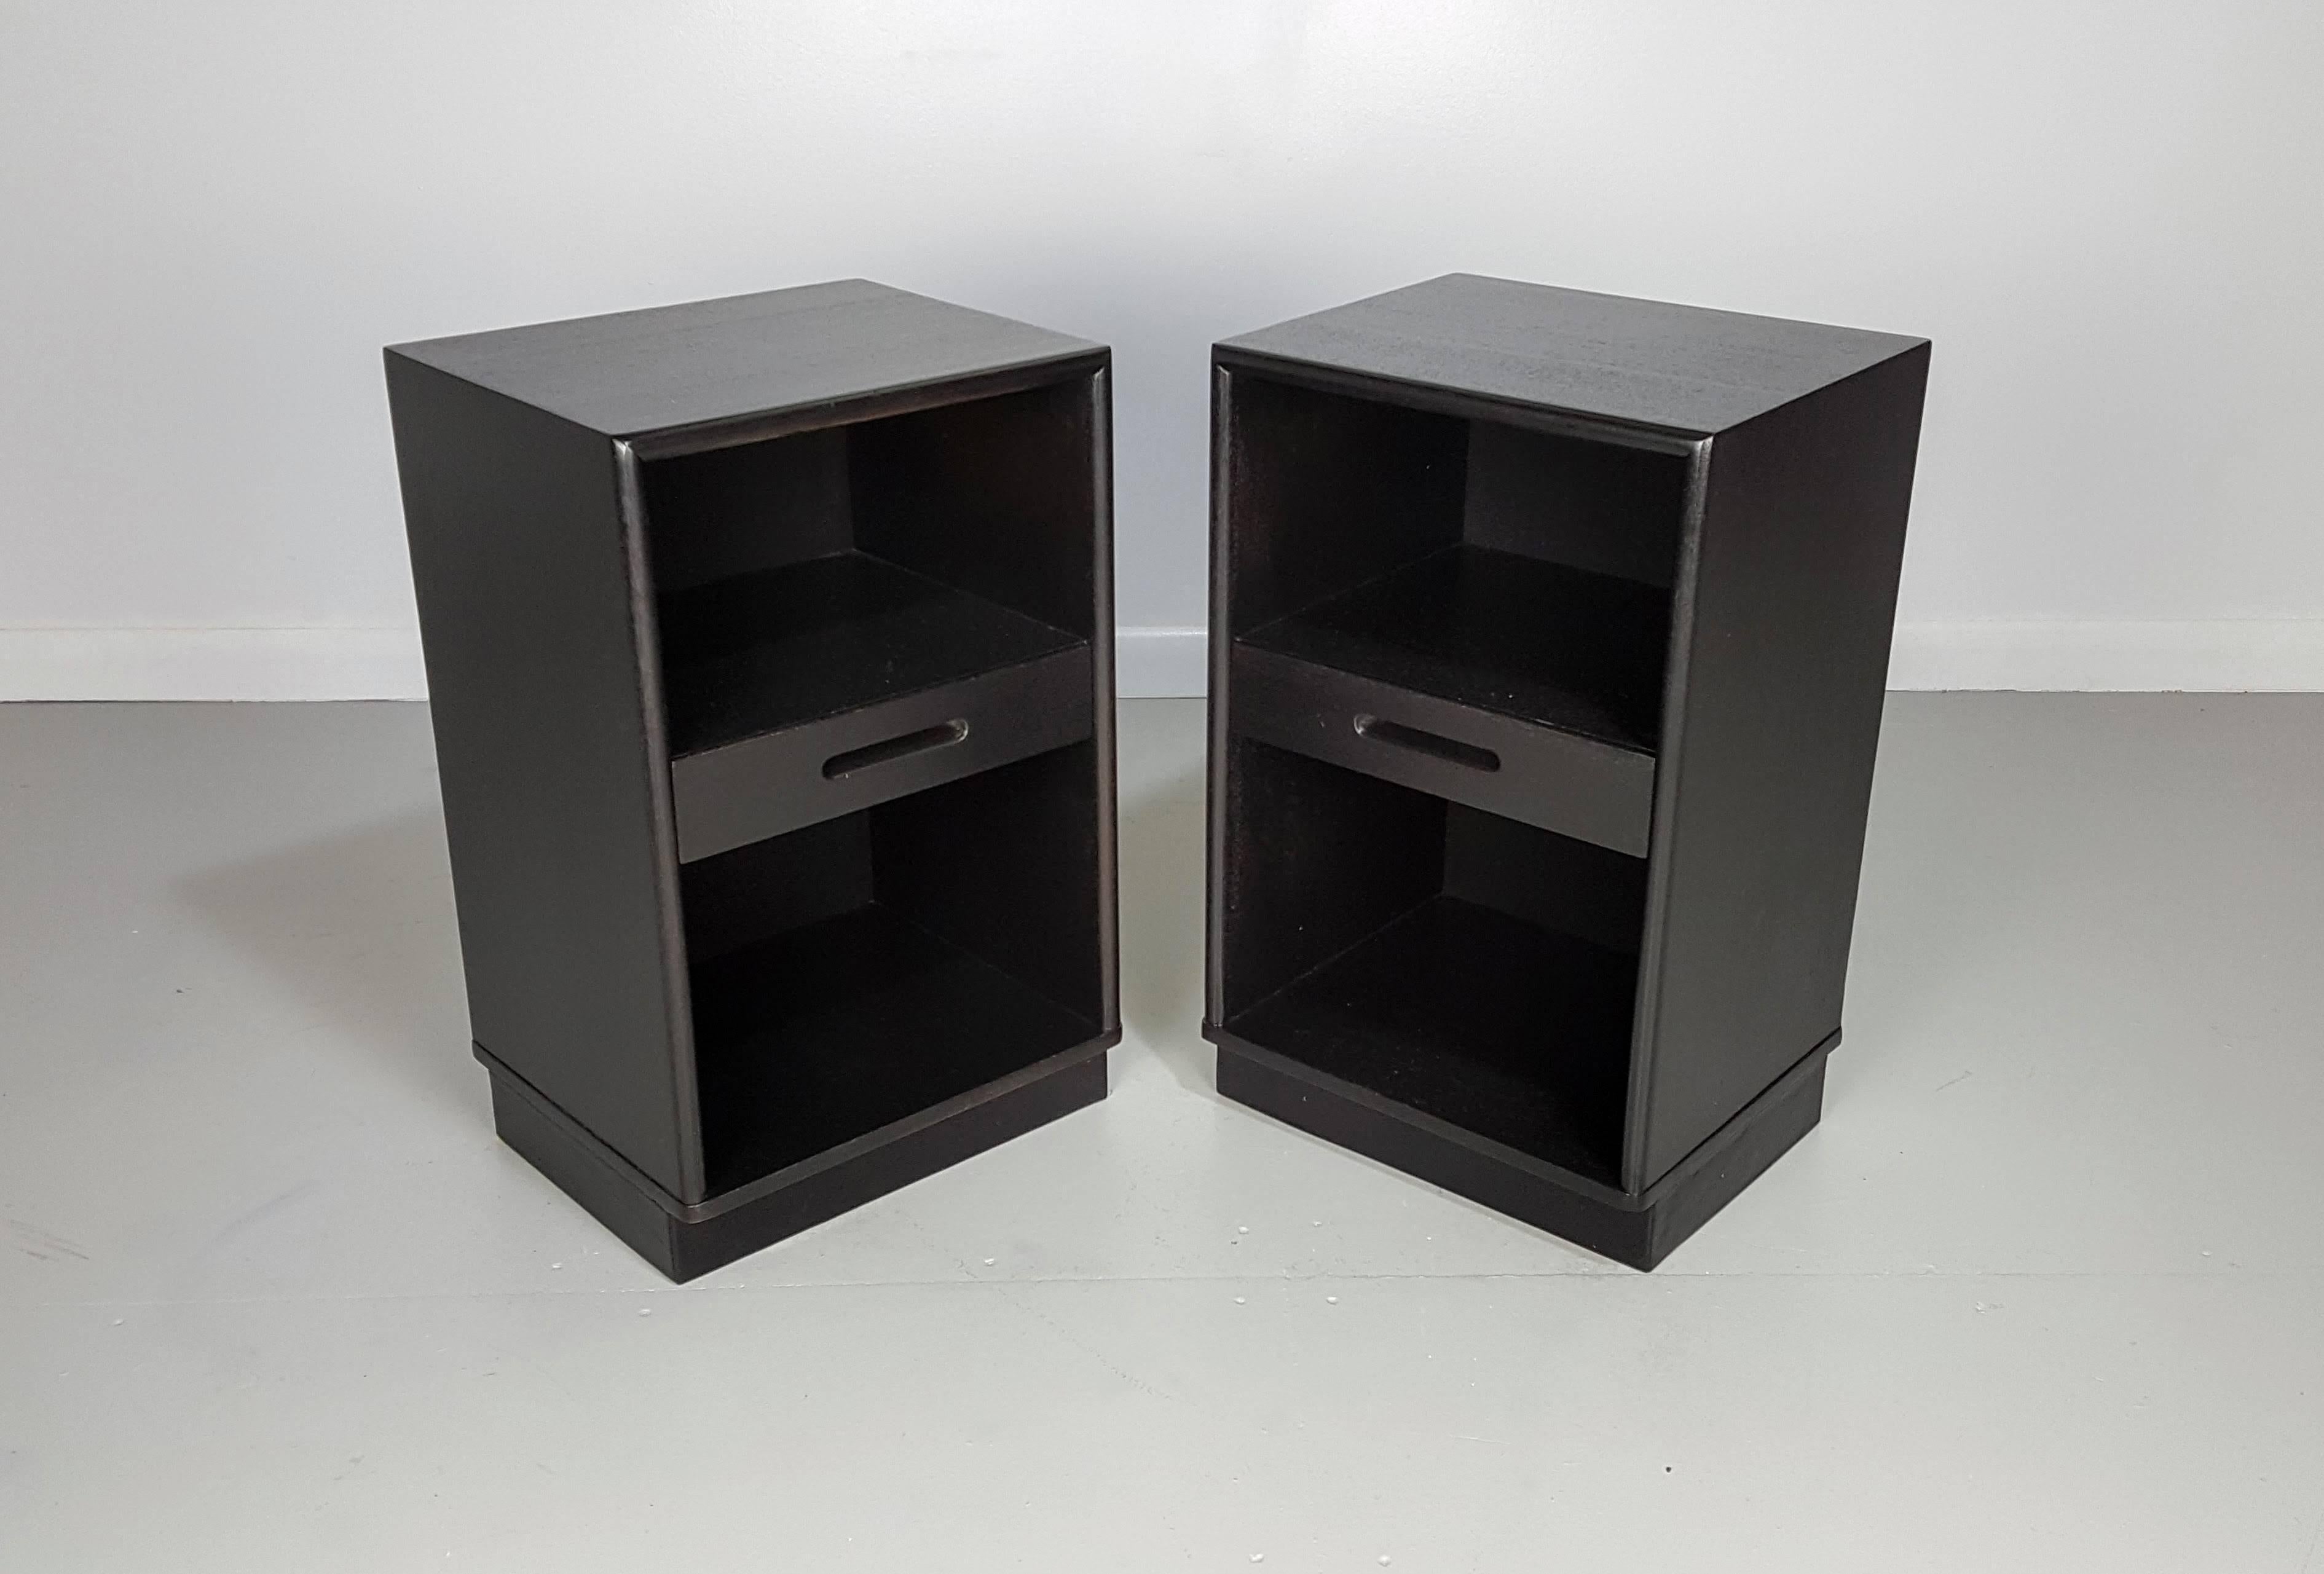 American Handsome Ebonized Nightstands with Leather Plinth Bases by Edward Wormley, 1950s